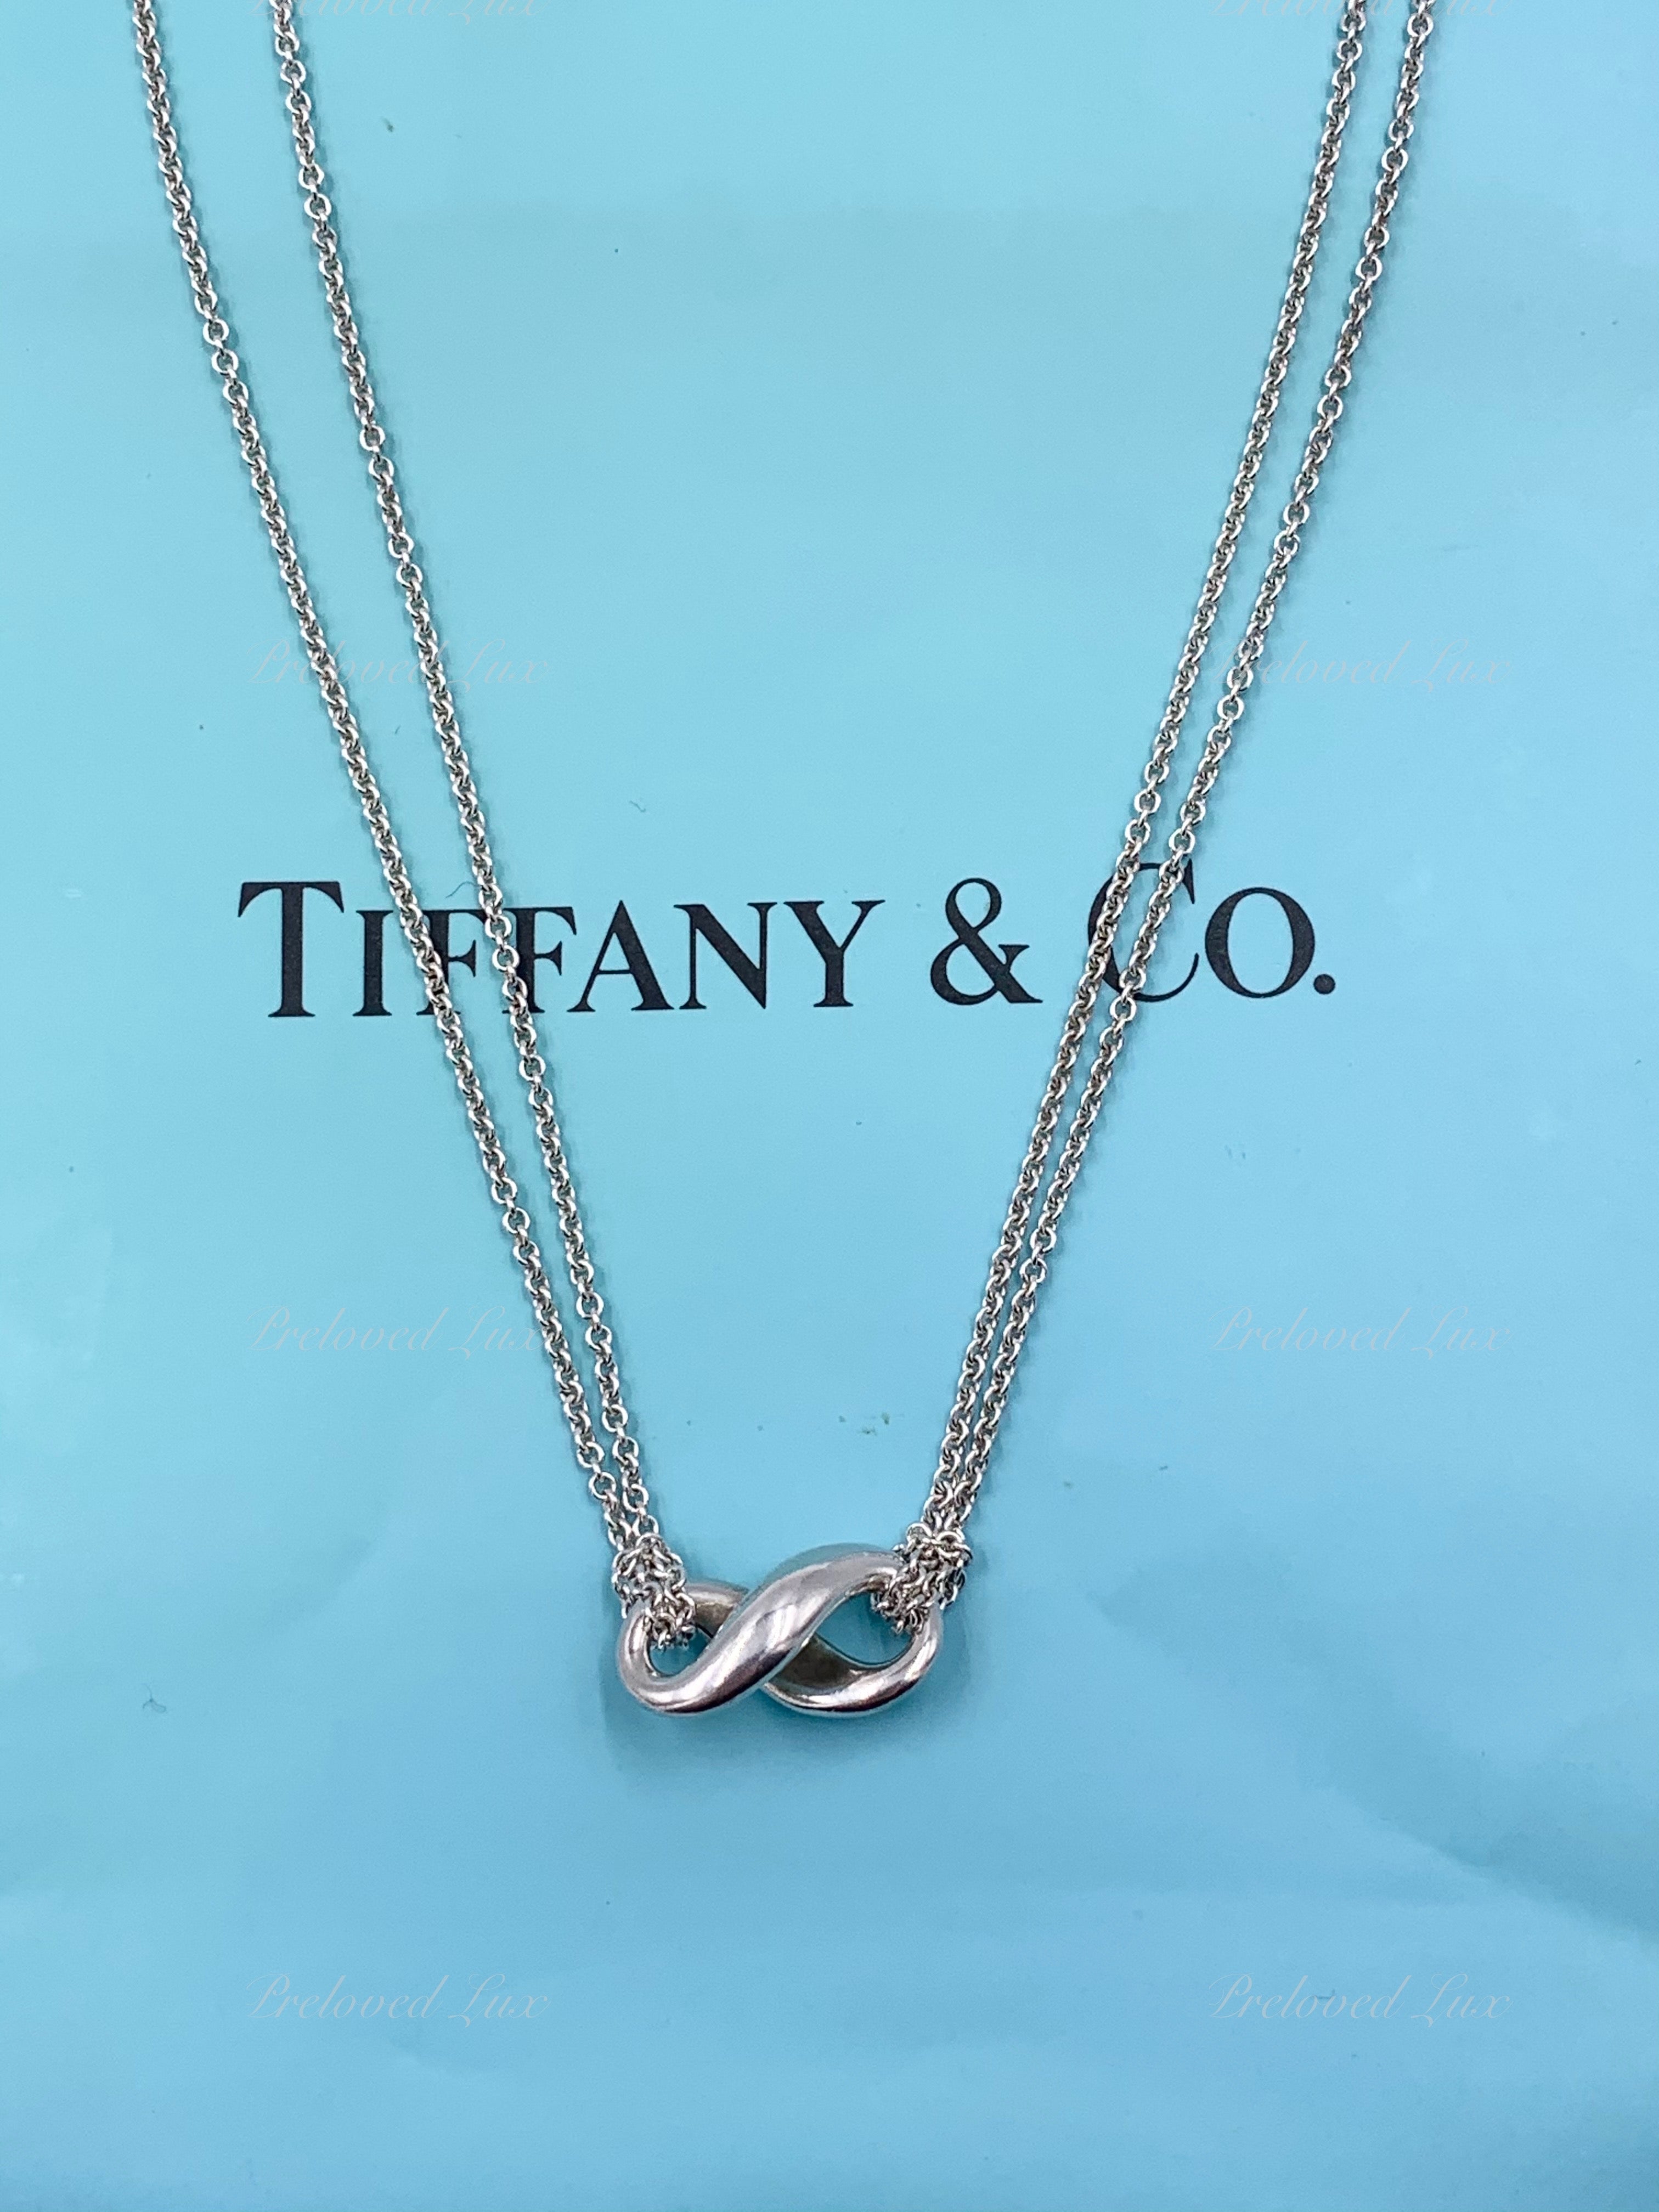 Tiffany & Co 925 Silver Infinity Pendant with Double Chain Necklace 